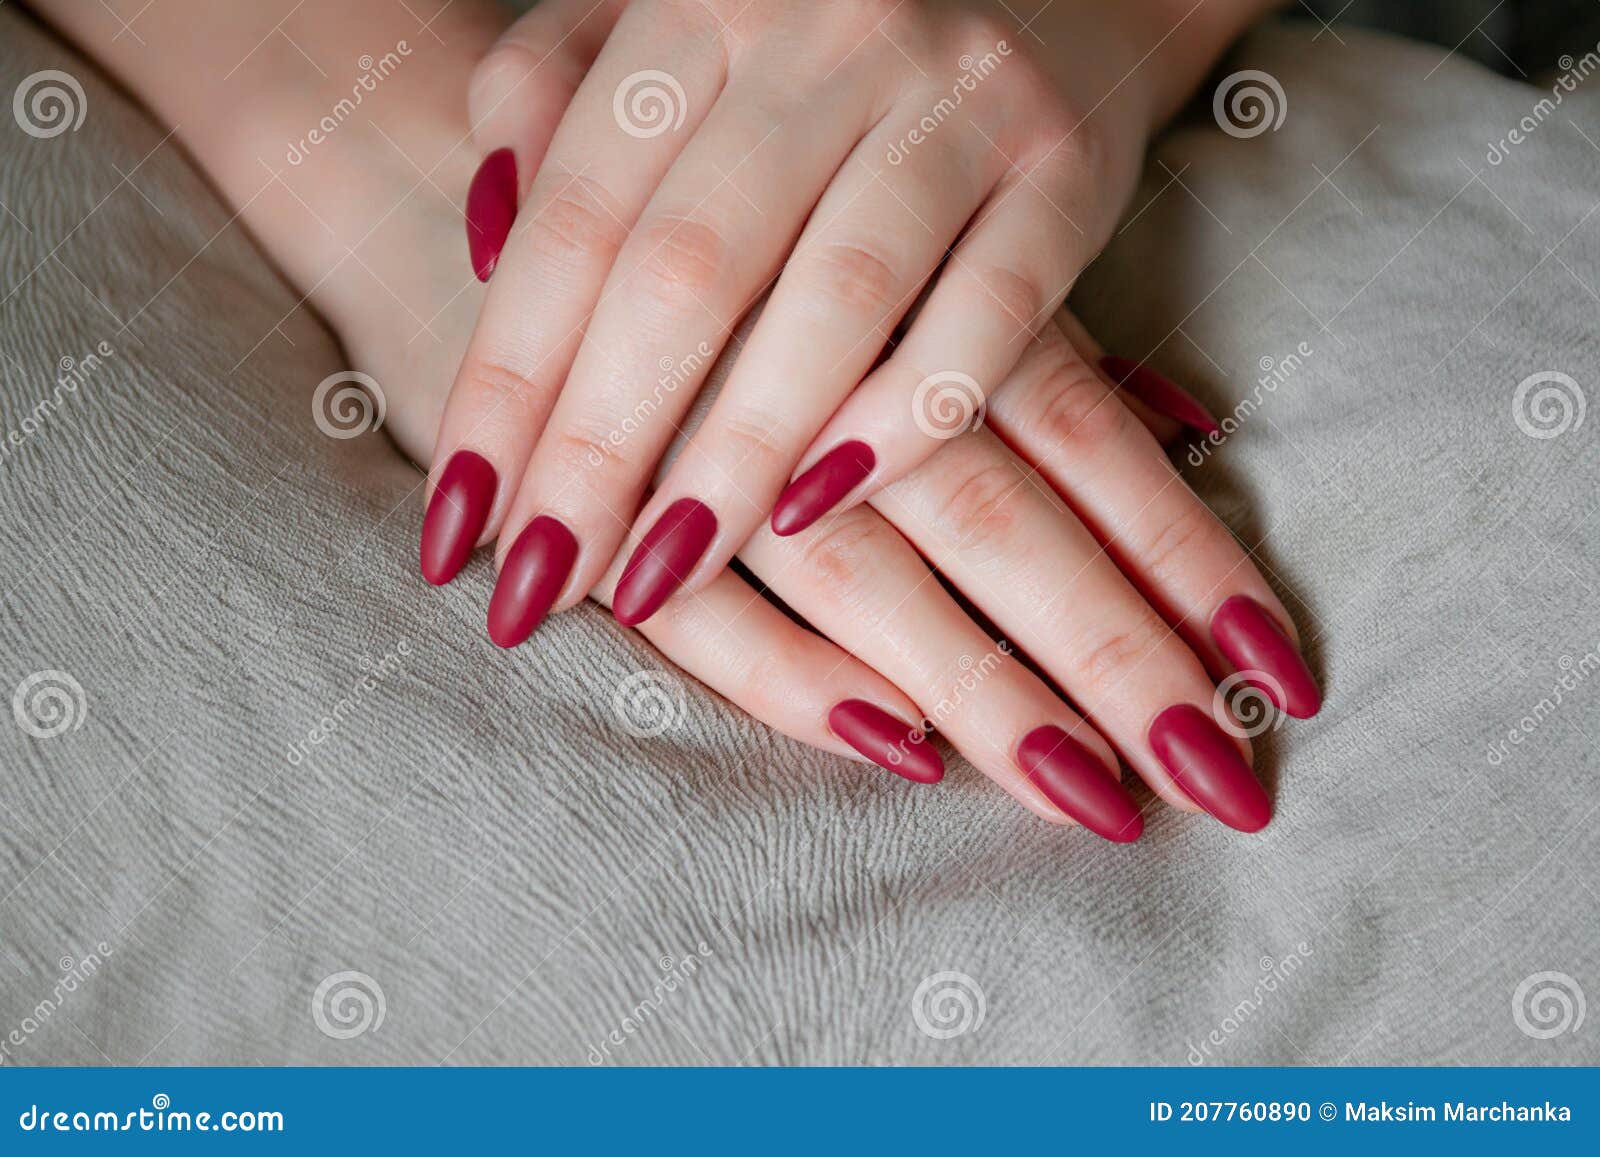 model woman showing red shellac manicure on long nails